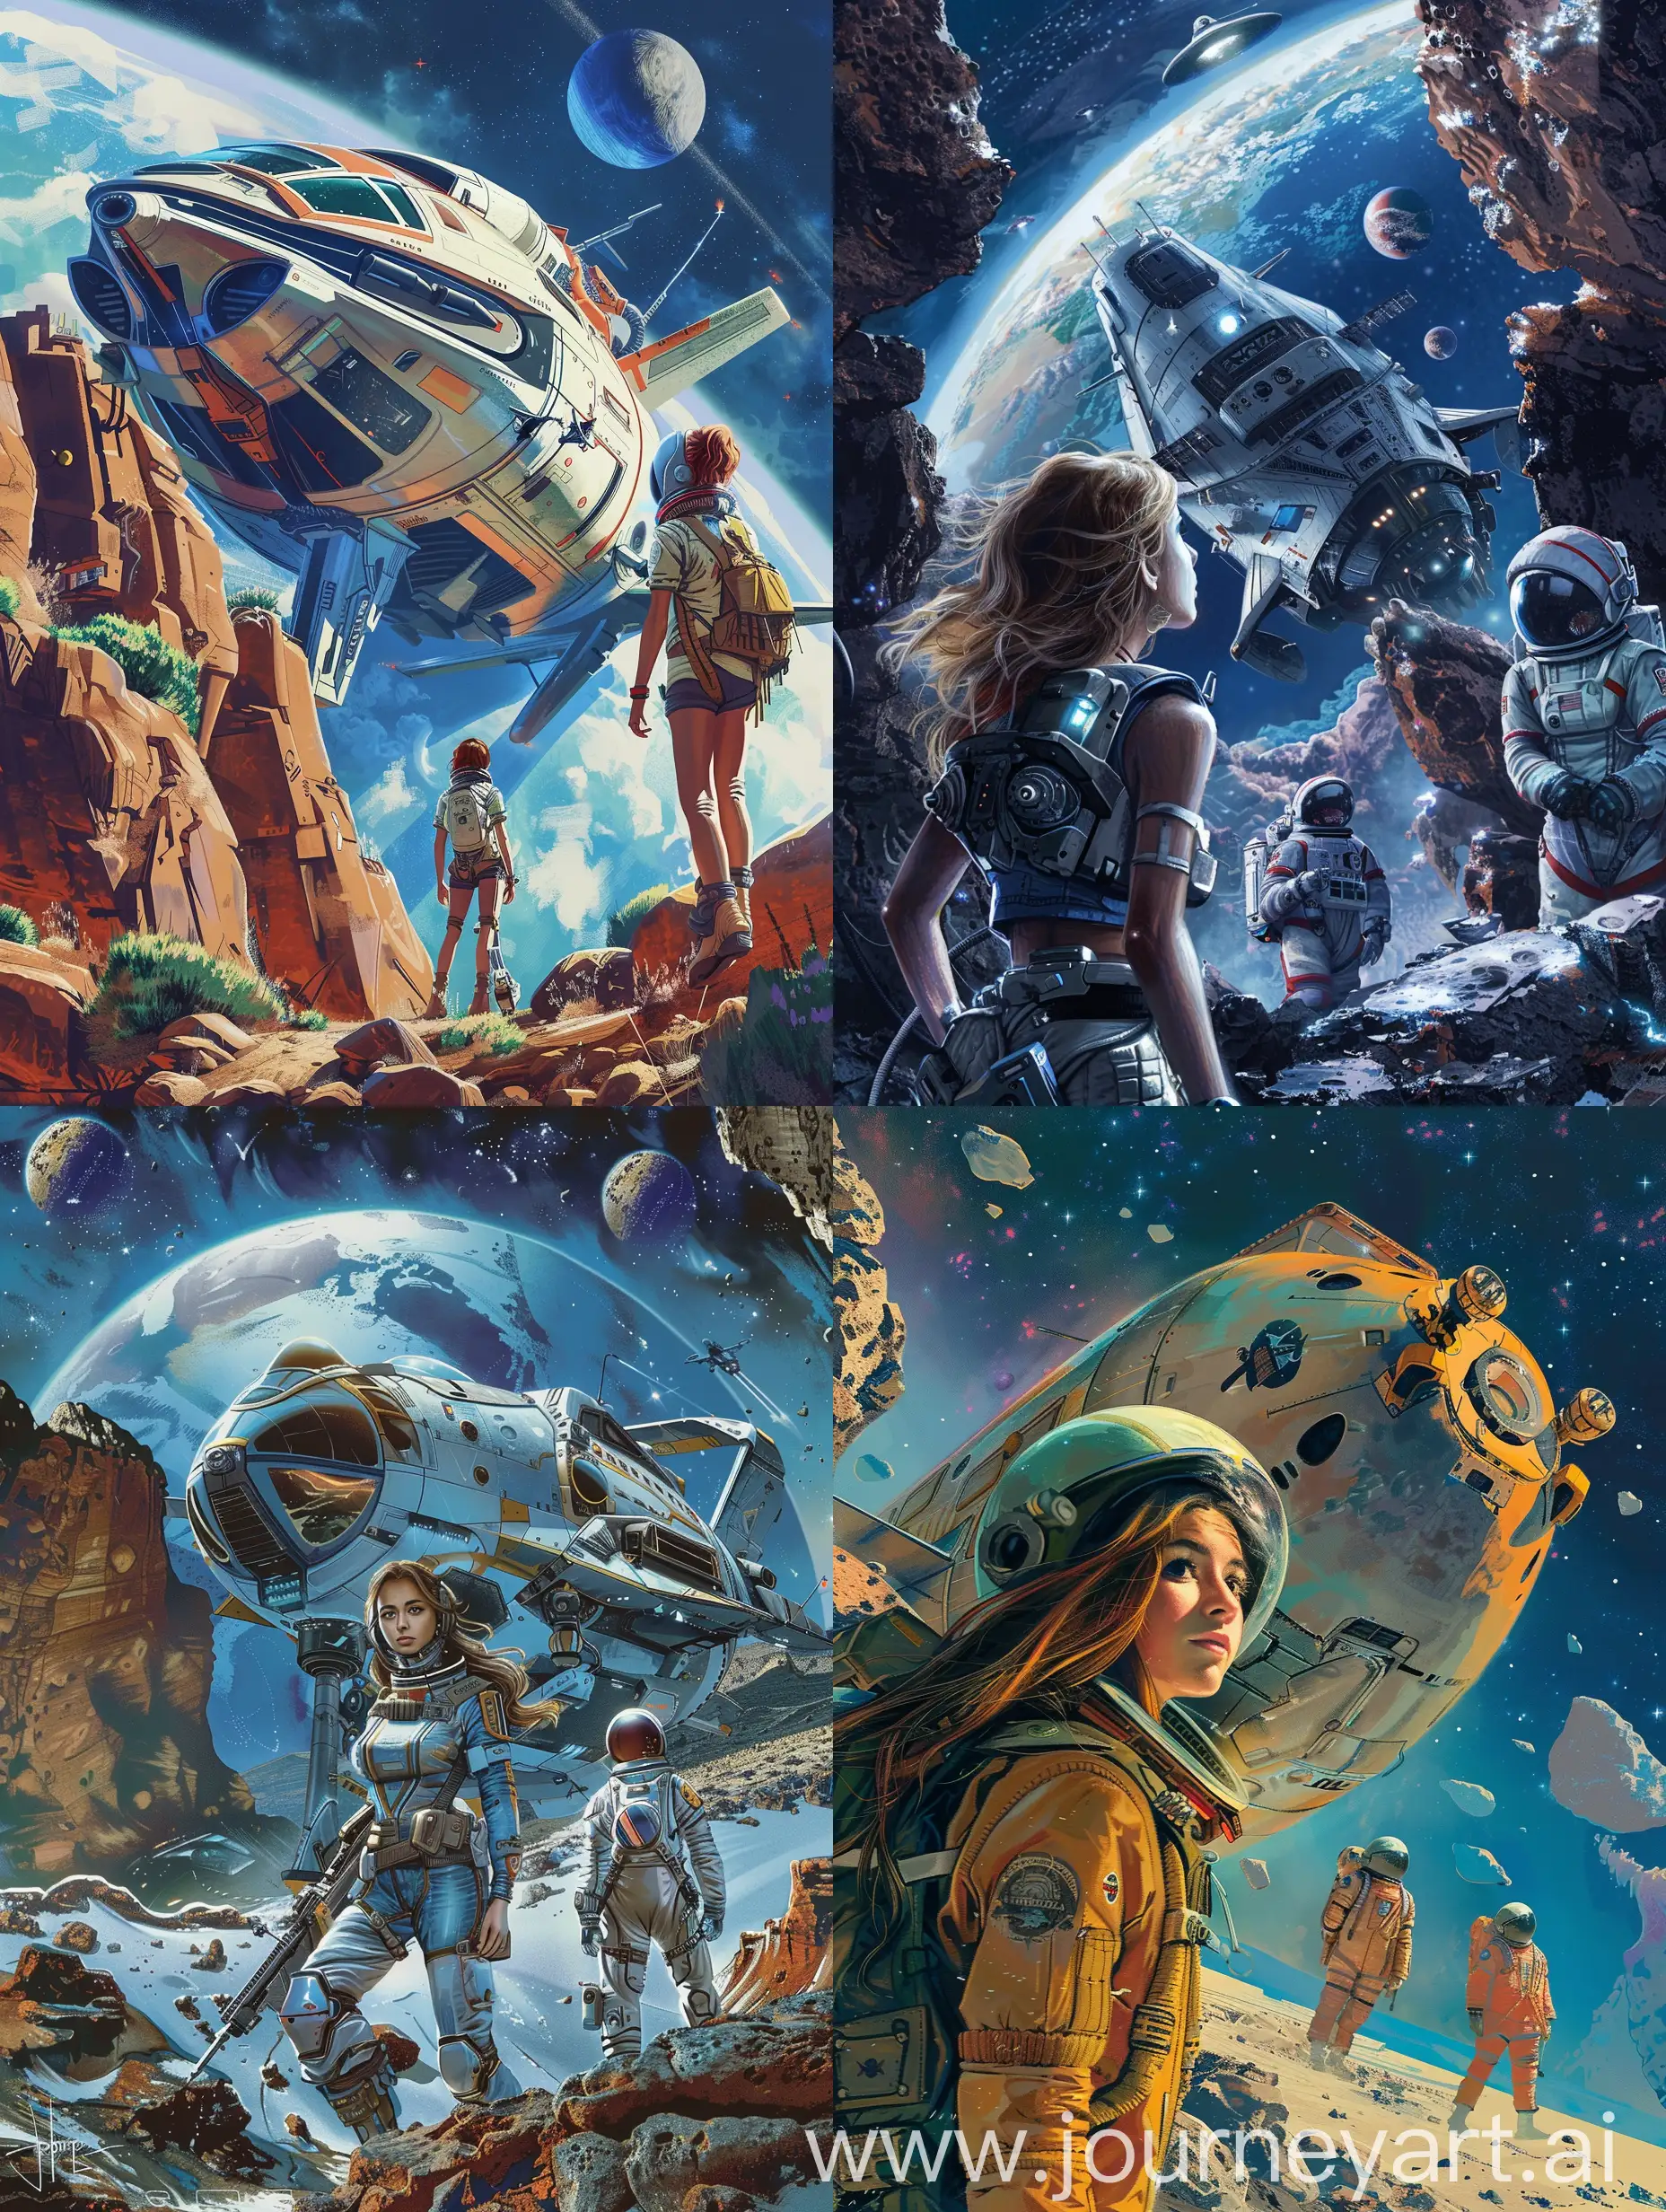 Create a visually exciting and challenging illustration in a realistic fantastic style of a beautiful young woman Space Nomad and Wanderer and asronaut in front of a spaceship discover in deep space. The illustration should depict a scene show grand scale, and incorporate influences from cosmoopera in comic style